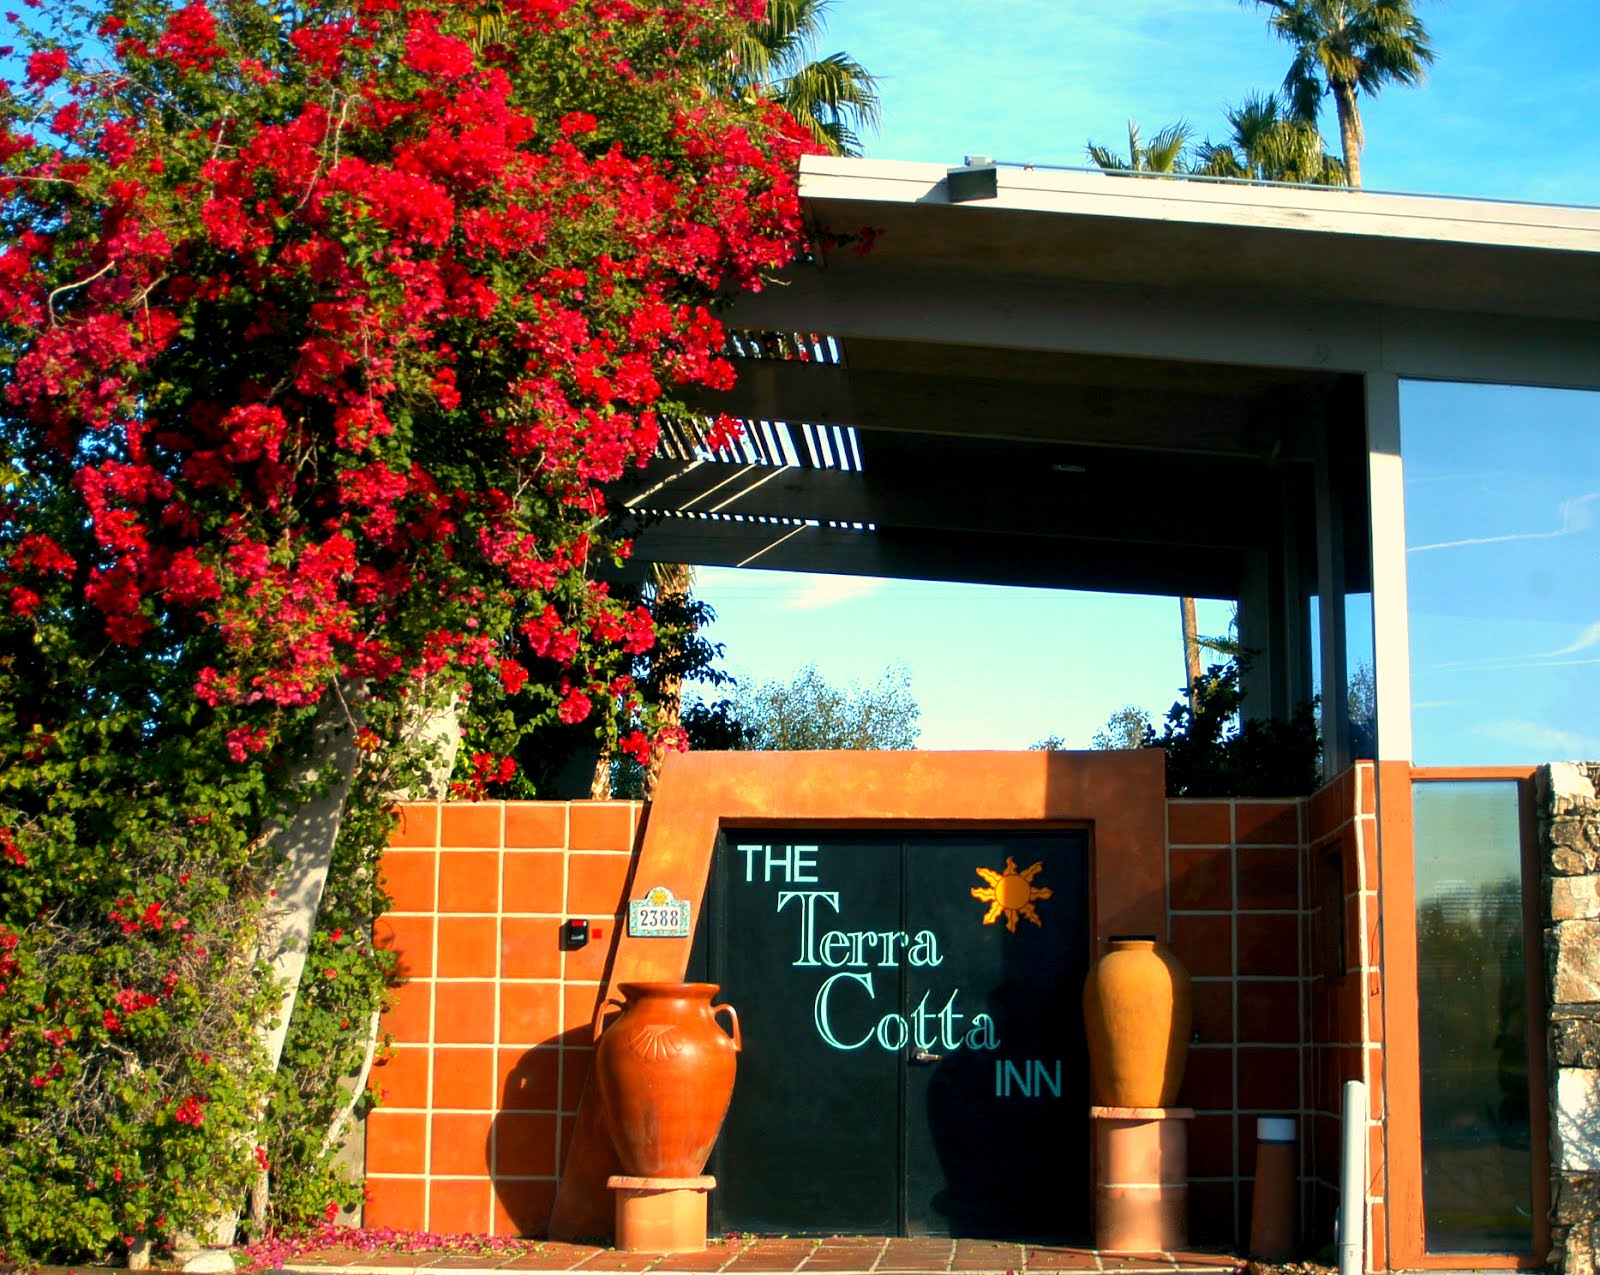 Nudist Resort Palm Springs - All about clothing optional and nudist resorts: 2012